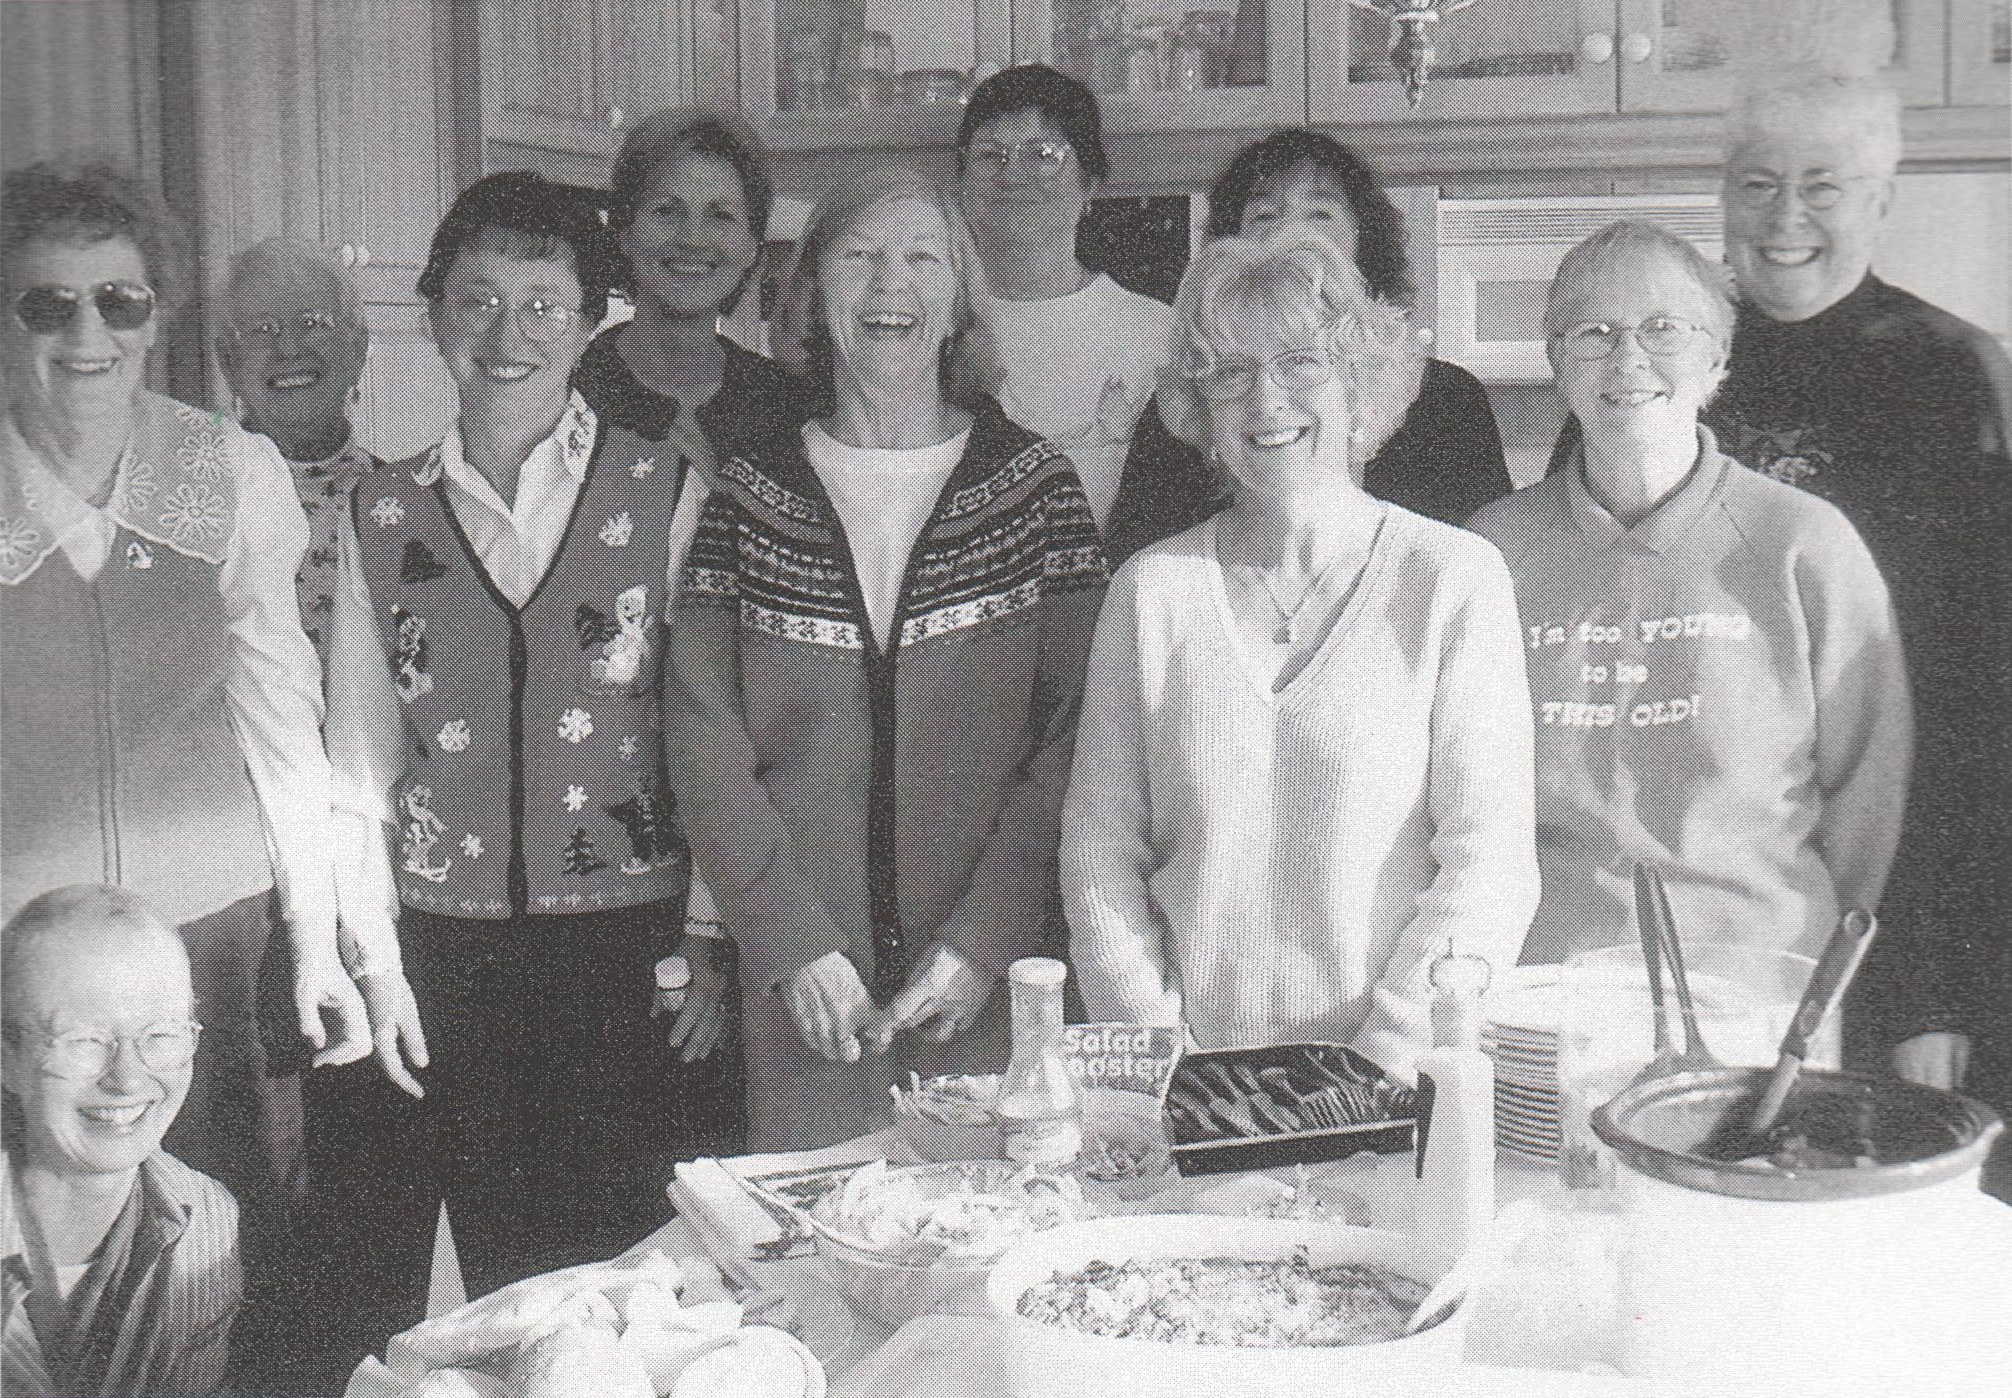 The ACW group in 2004: from left, Barbara Sherrington, Betty Young, Pauline Murray, Joyce Archer, Shirley Bays, Heather Pearce, Sharon Barnden, Jan Allen (with Muriel Ryan behind her), Milli Pratt and Penny West.